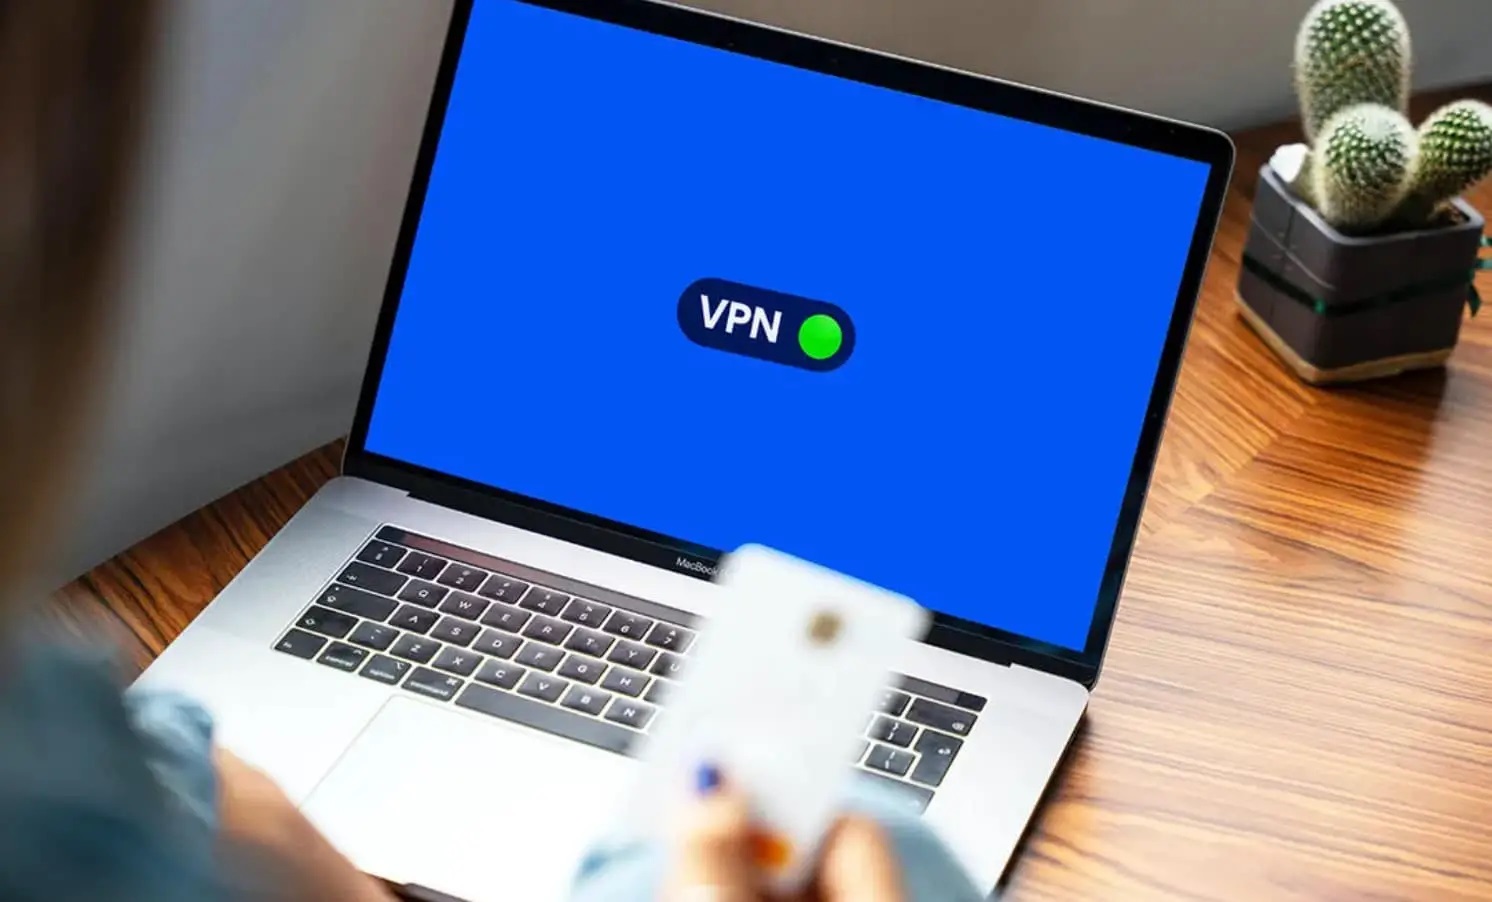 DIY VPN: Create Your Own Virtual Private Network